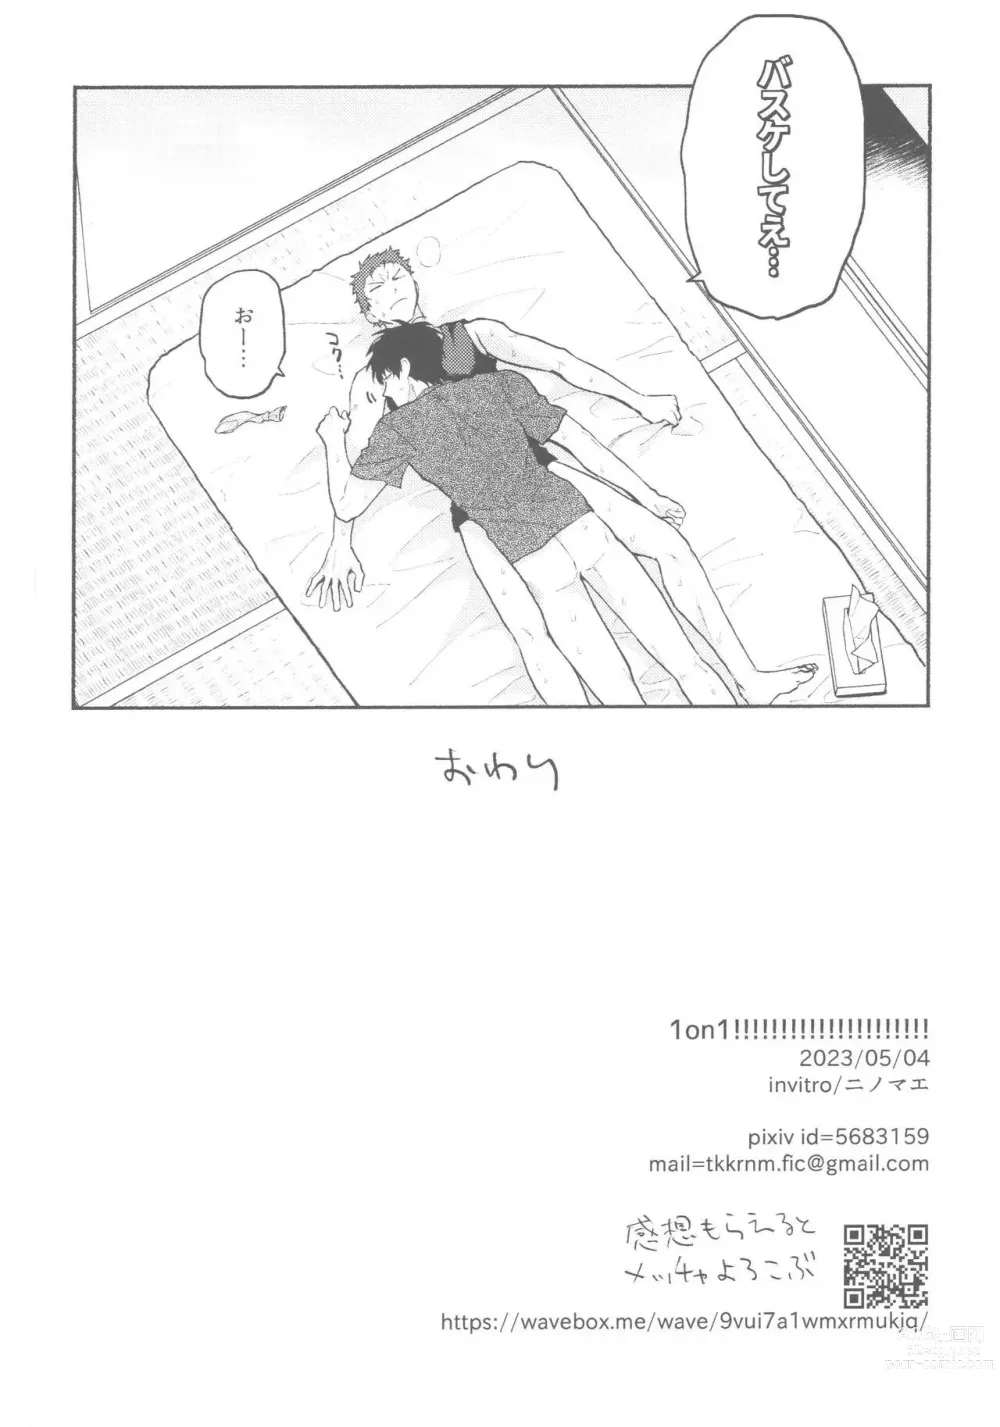 Page 17 of doujinshi 1on1!!!!!!!!!!!!!!!!!!!!!